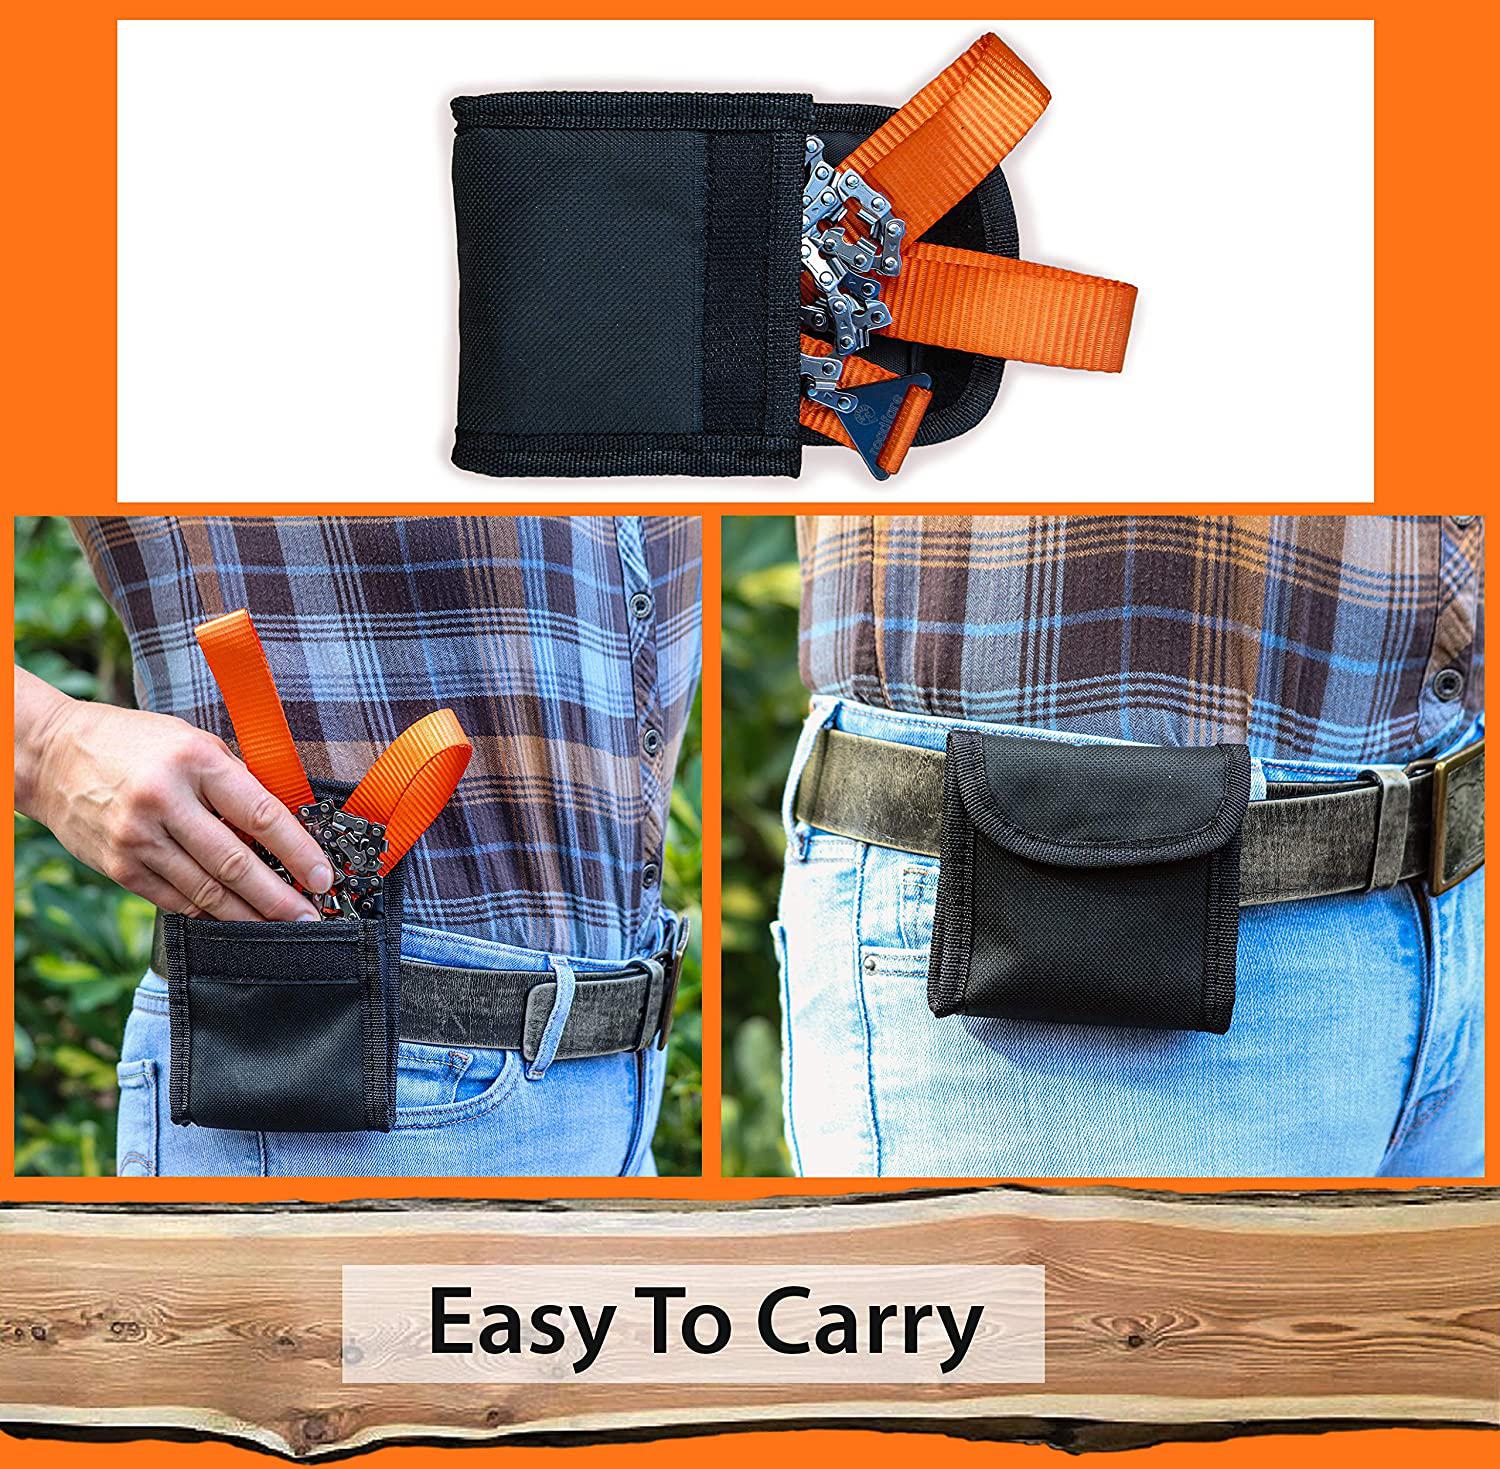 37 Inexpensive Gadgets You Need in Your Toolbelt - 22 Words